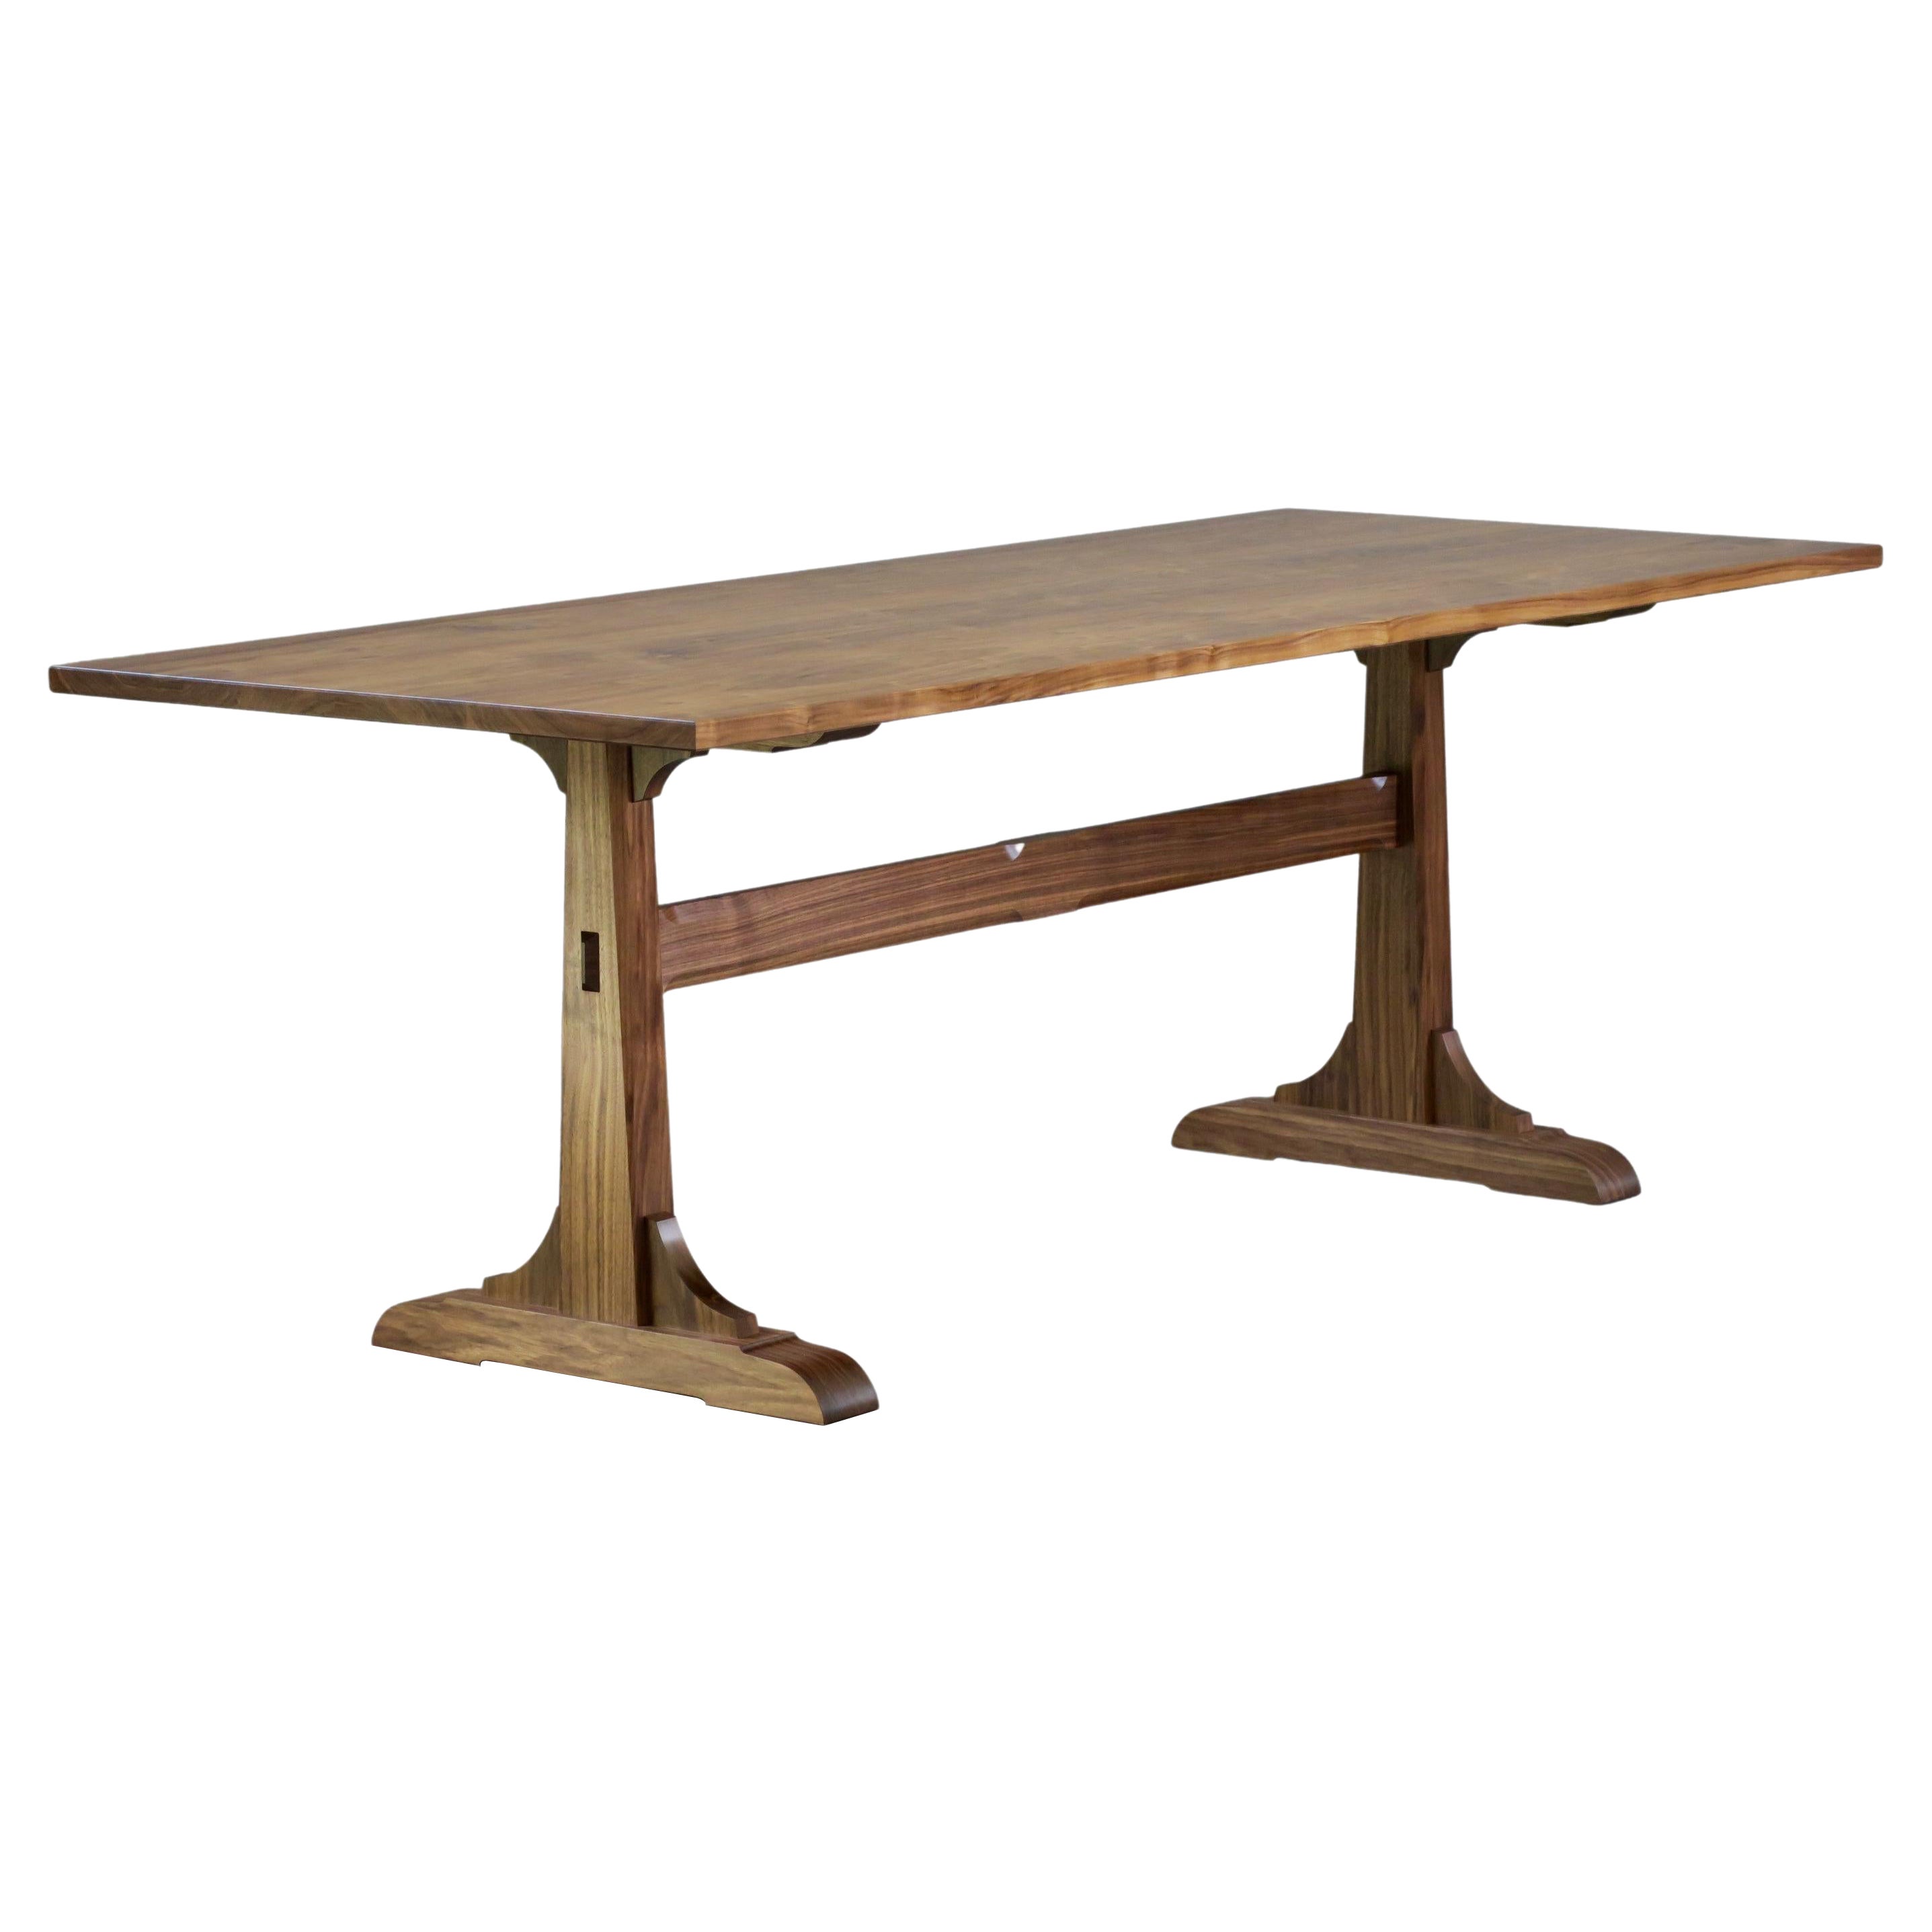 Walnut Trestle Dining Table by Thomas Throop/Black Creek Designs - Made To Order